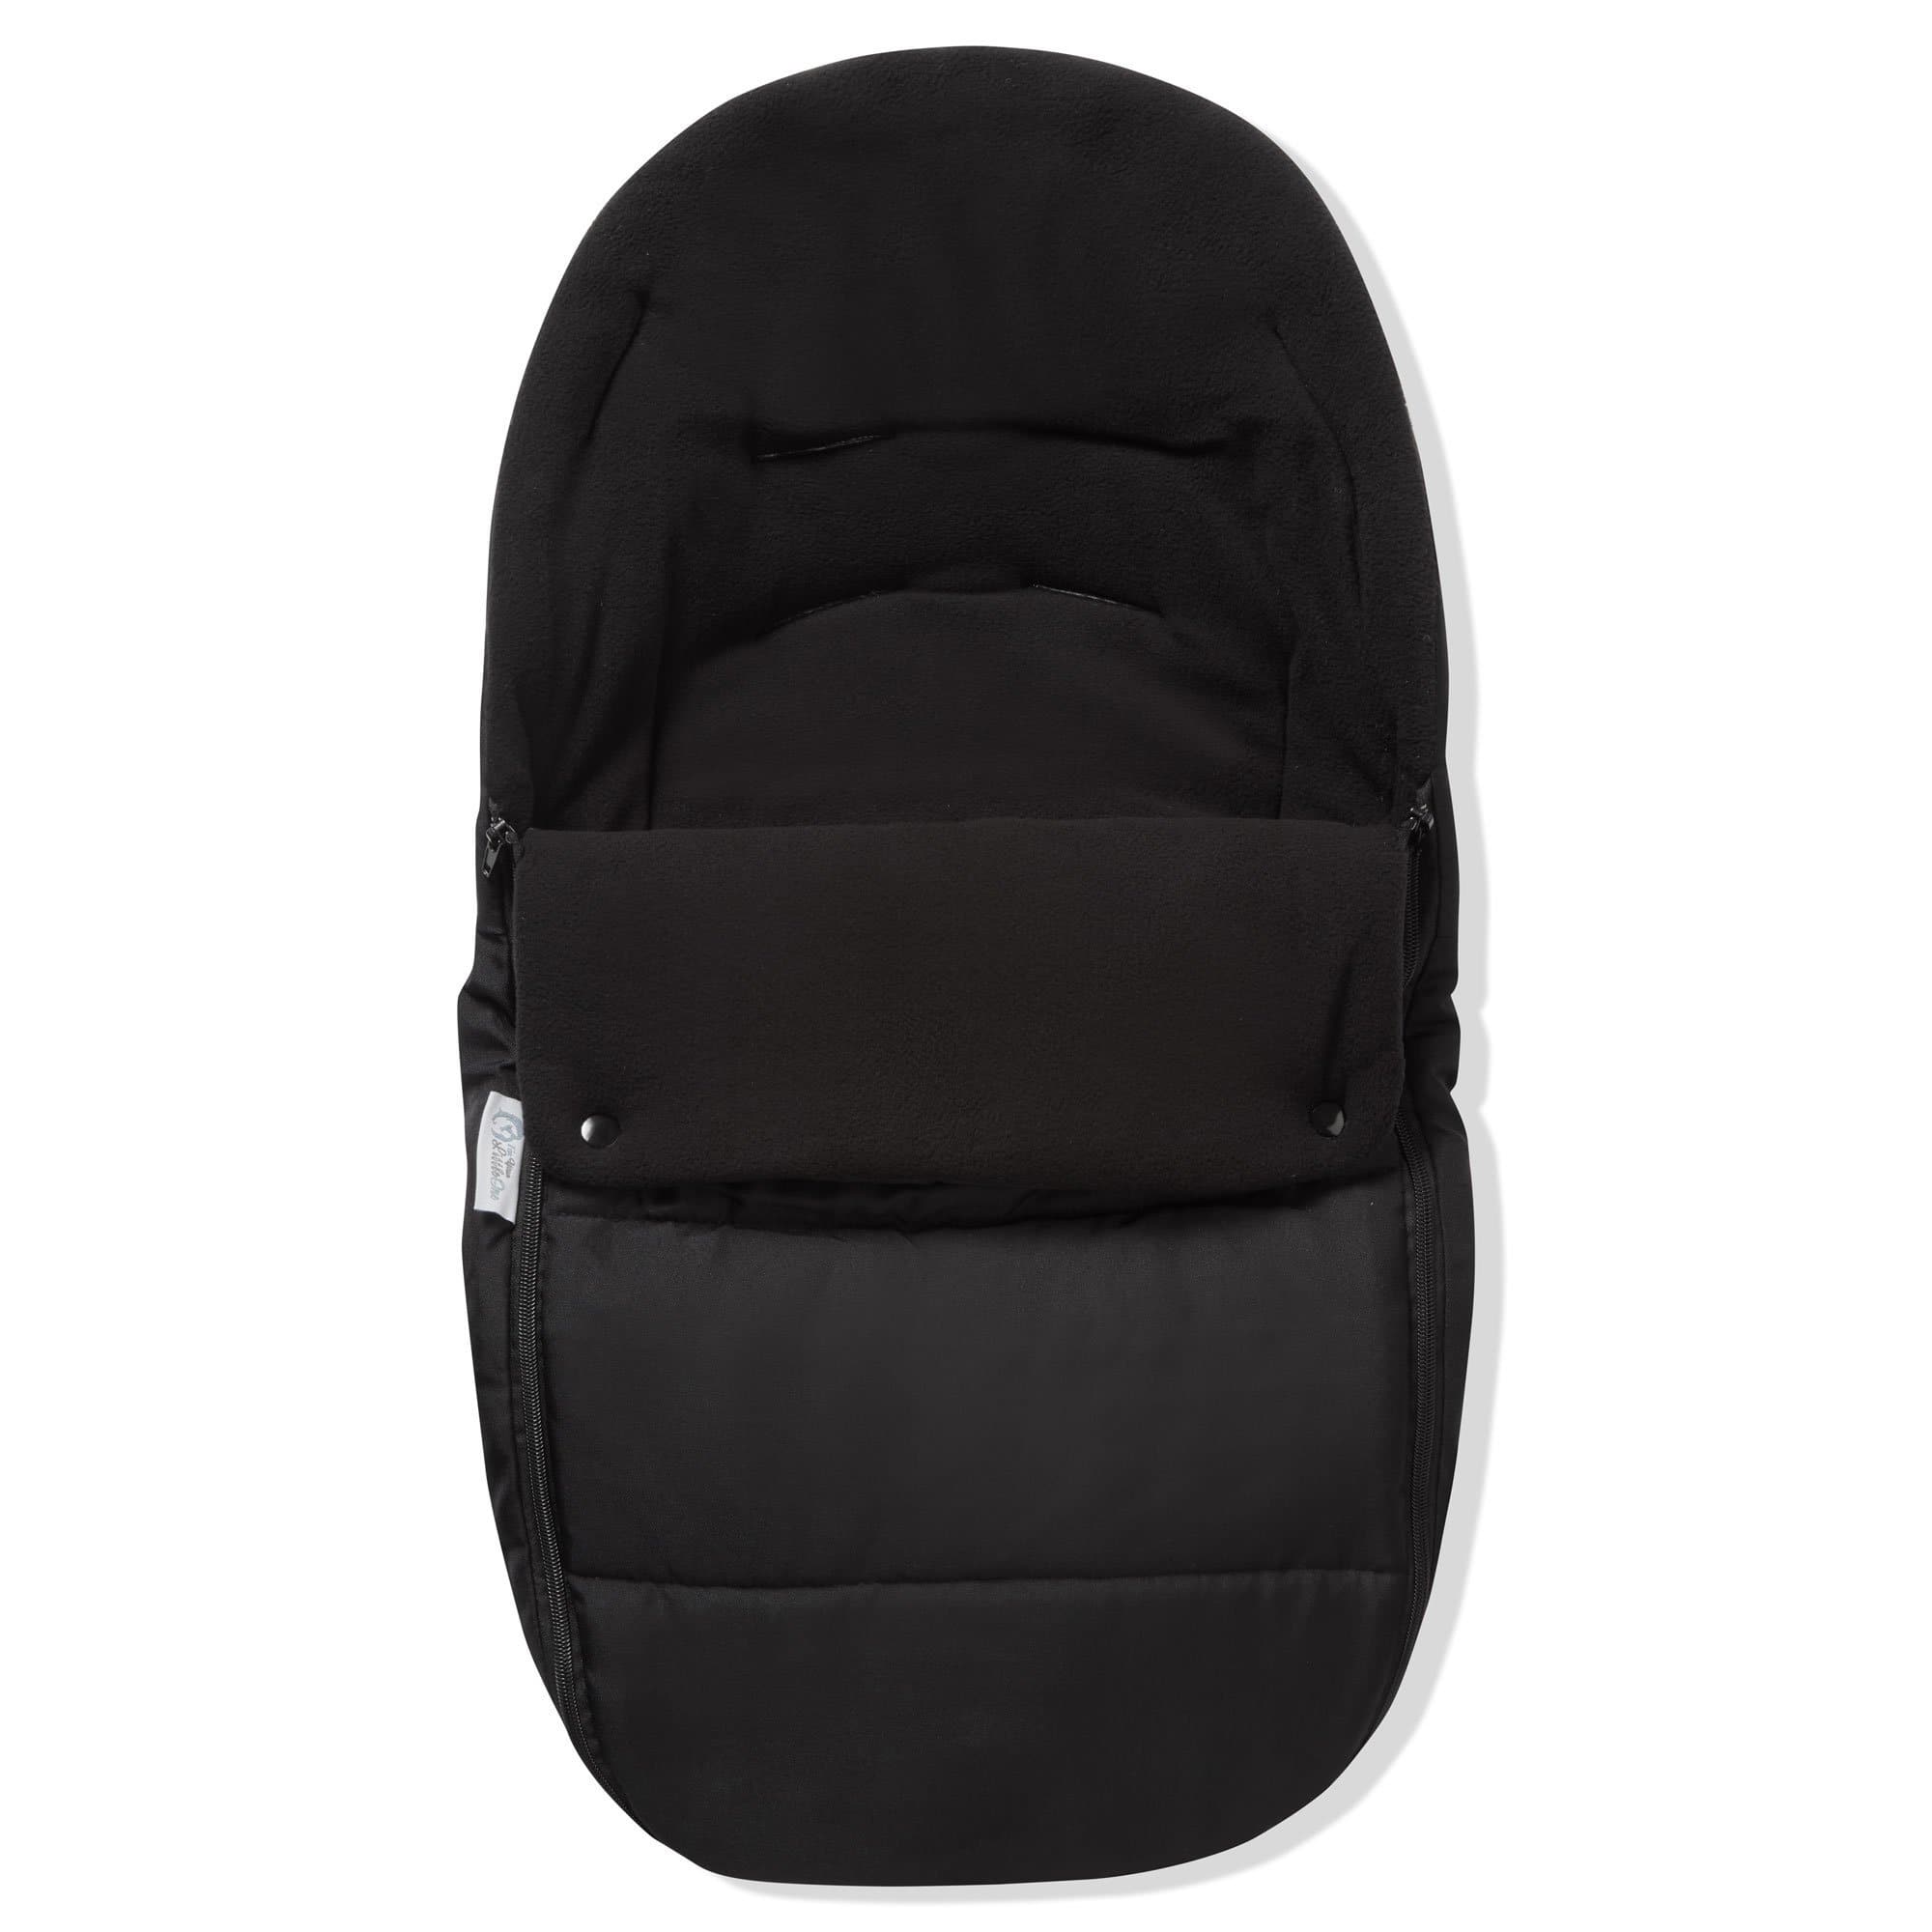 Premium Car Seat Footmuff / Cosy Toes Compatible with My Child - Black Jack / Fits All Models | For Your Little One